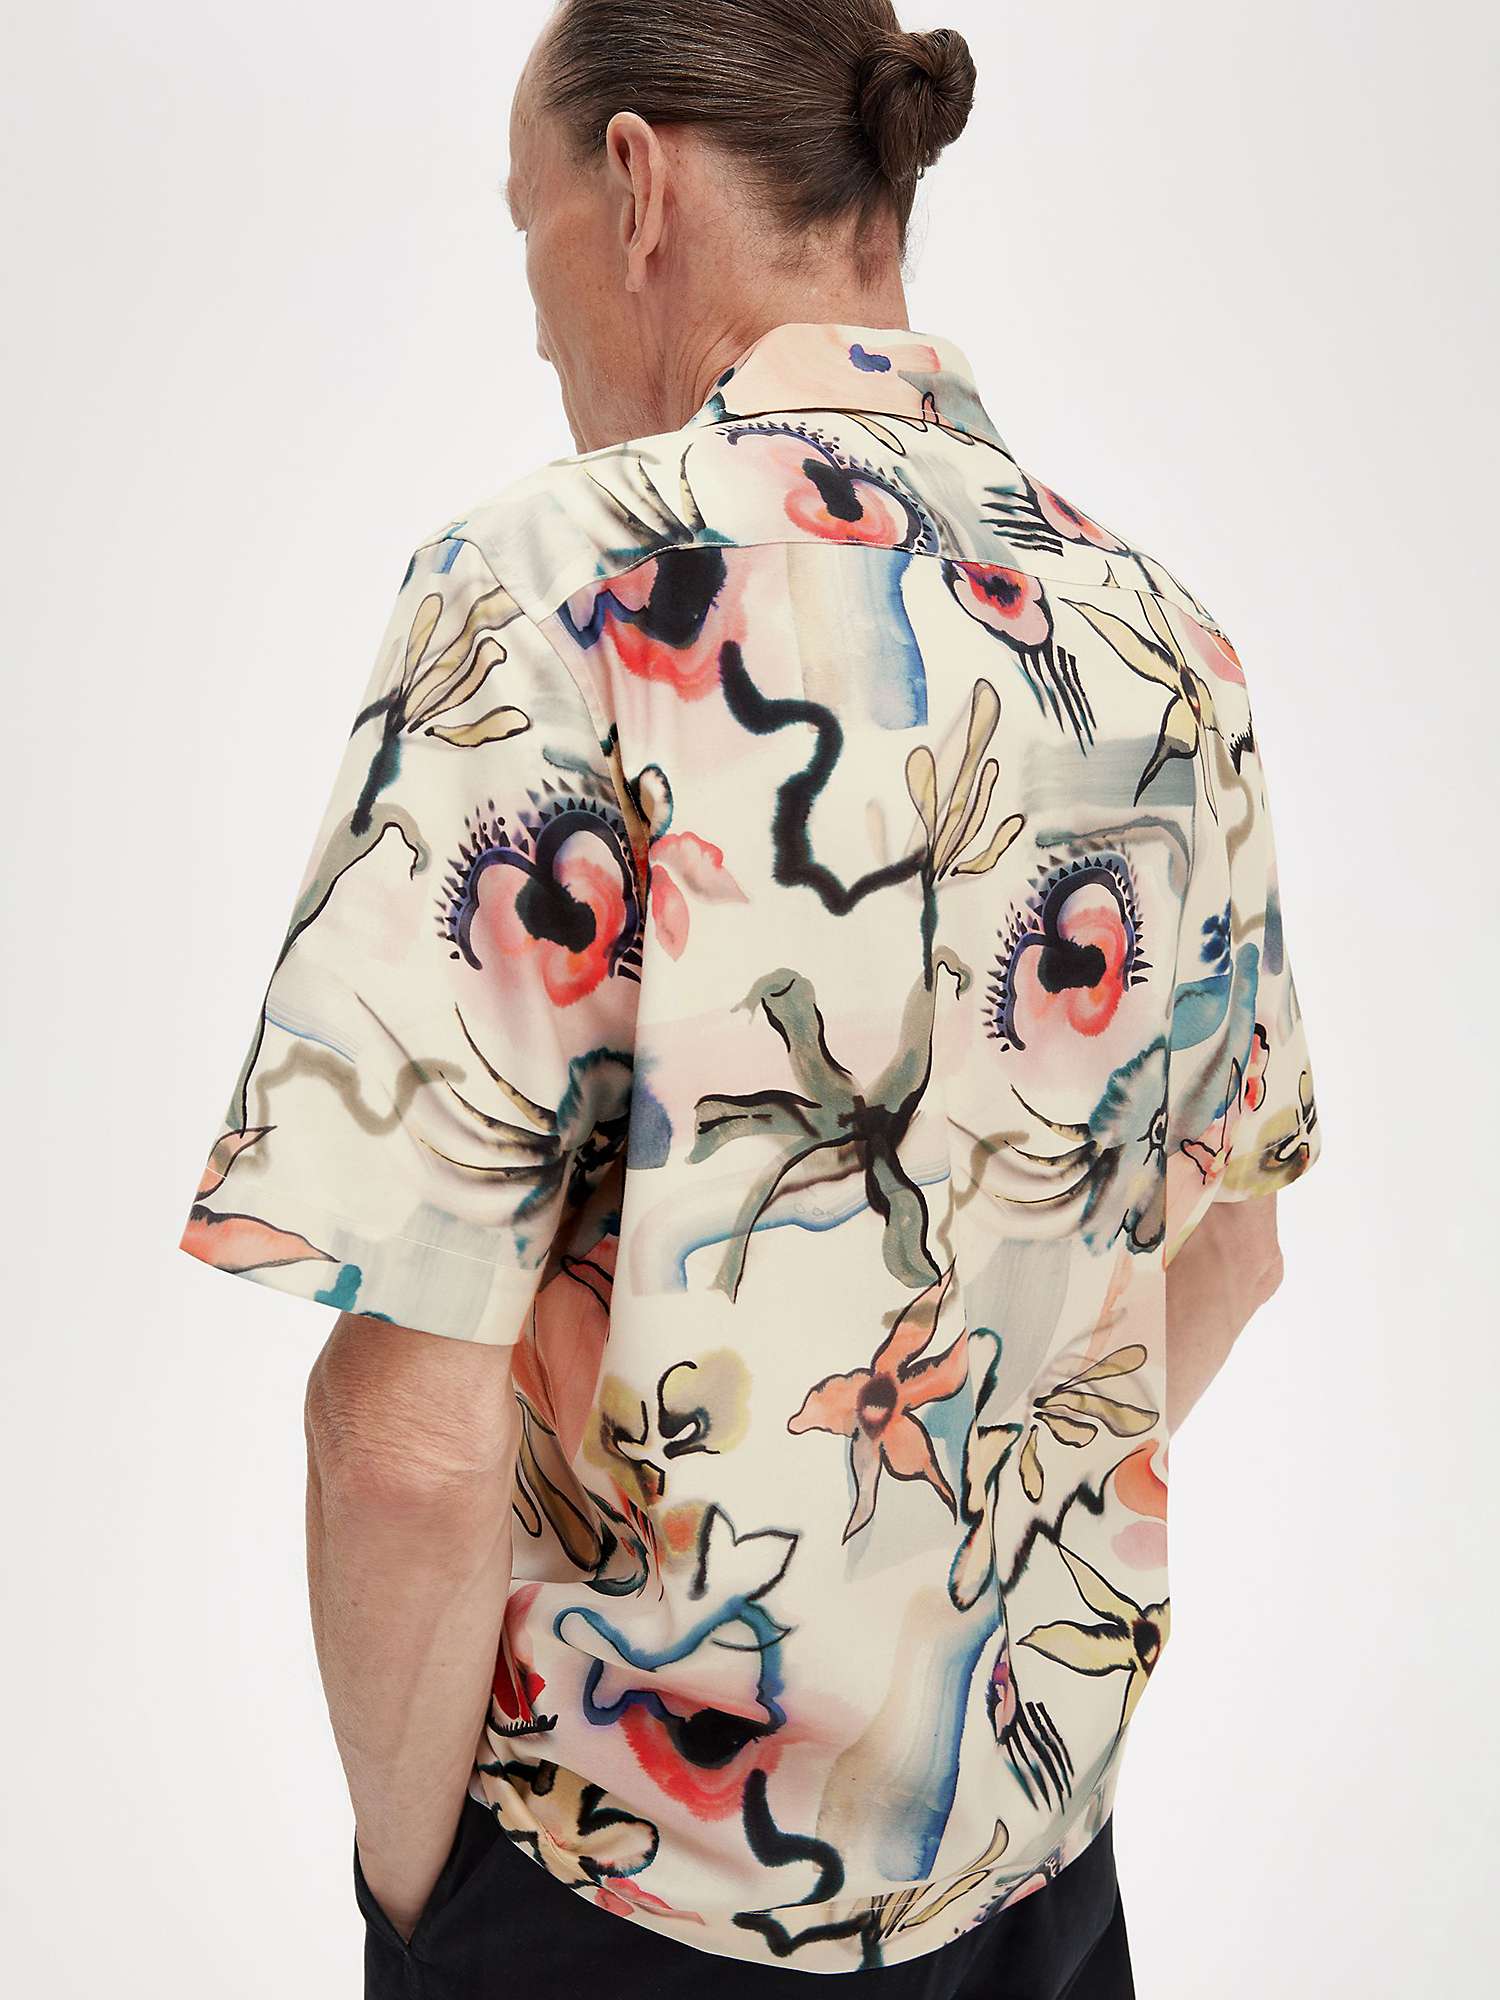 Buy Fred Perry Floral Print Short Sleeve Shirt, Peach/Multi Online at johnlewis.com